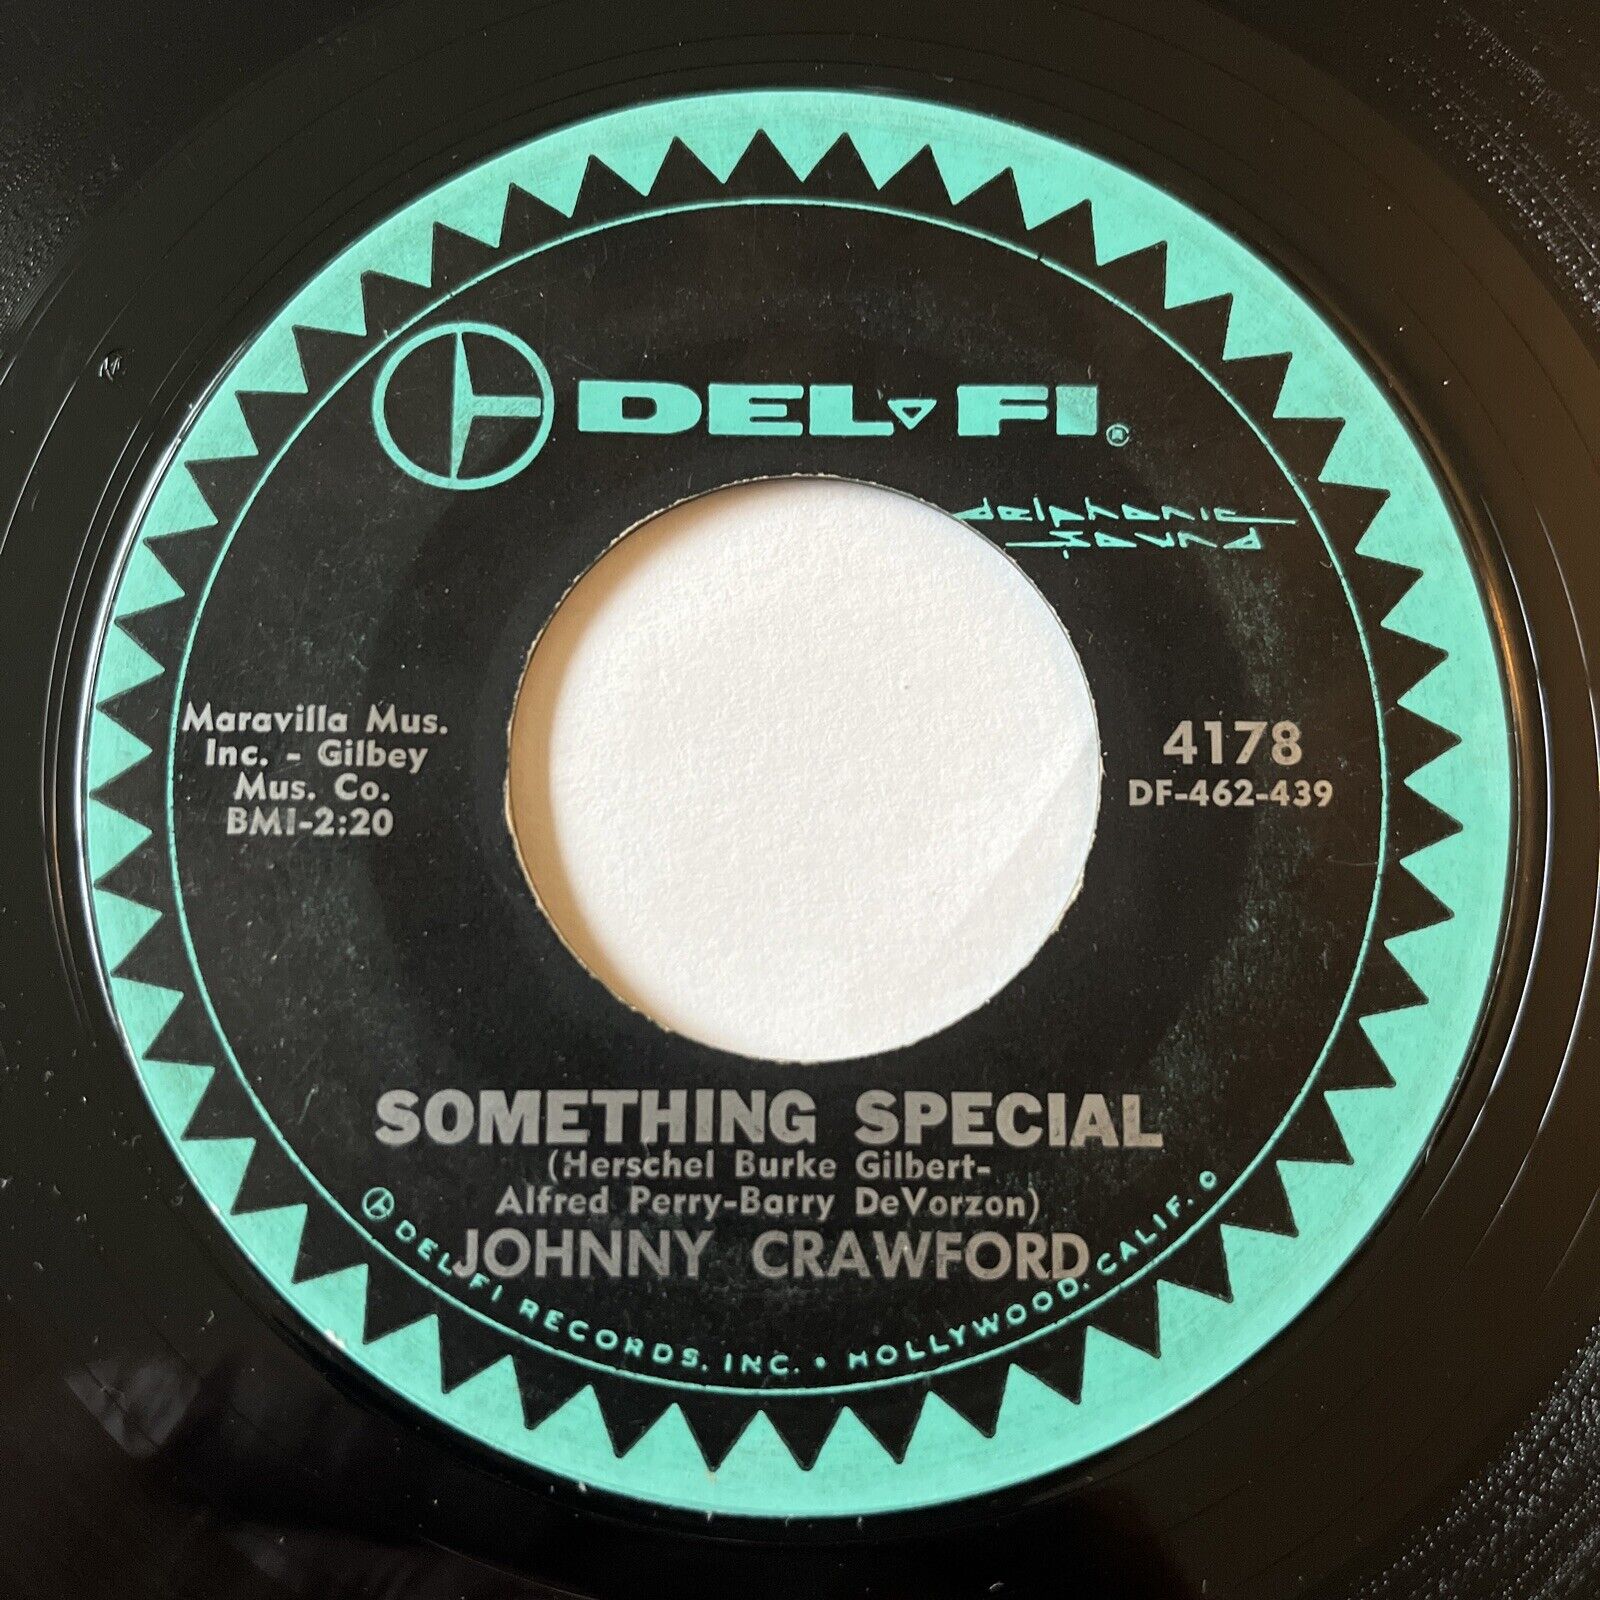 1962 POP Rock JOHNNY CRAWFORD - SOMETHING SPECIAL - 45rpm Record Del-Fi 4178